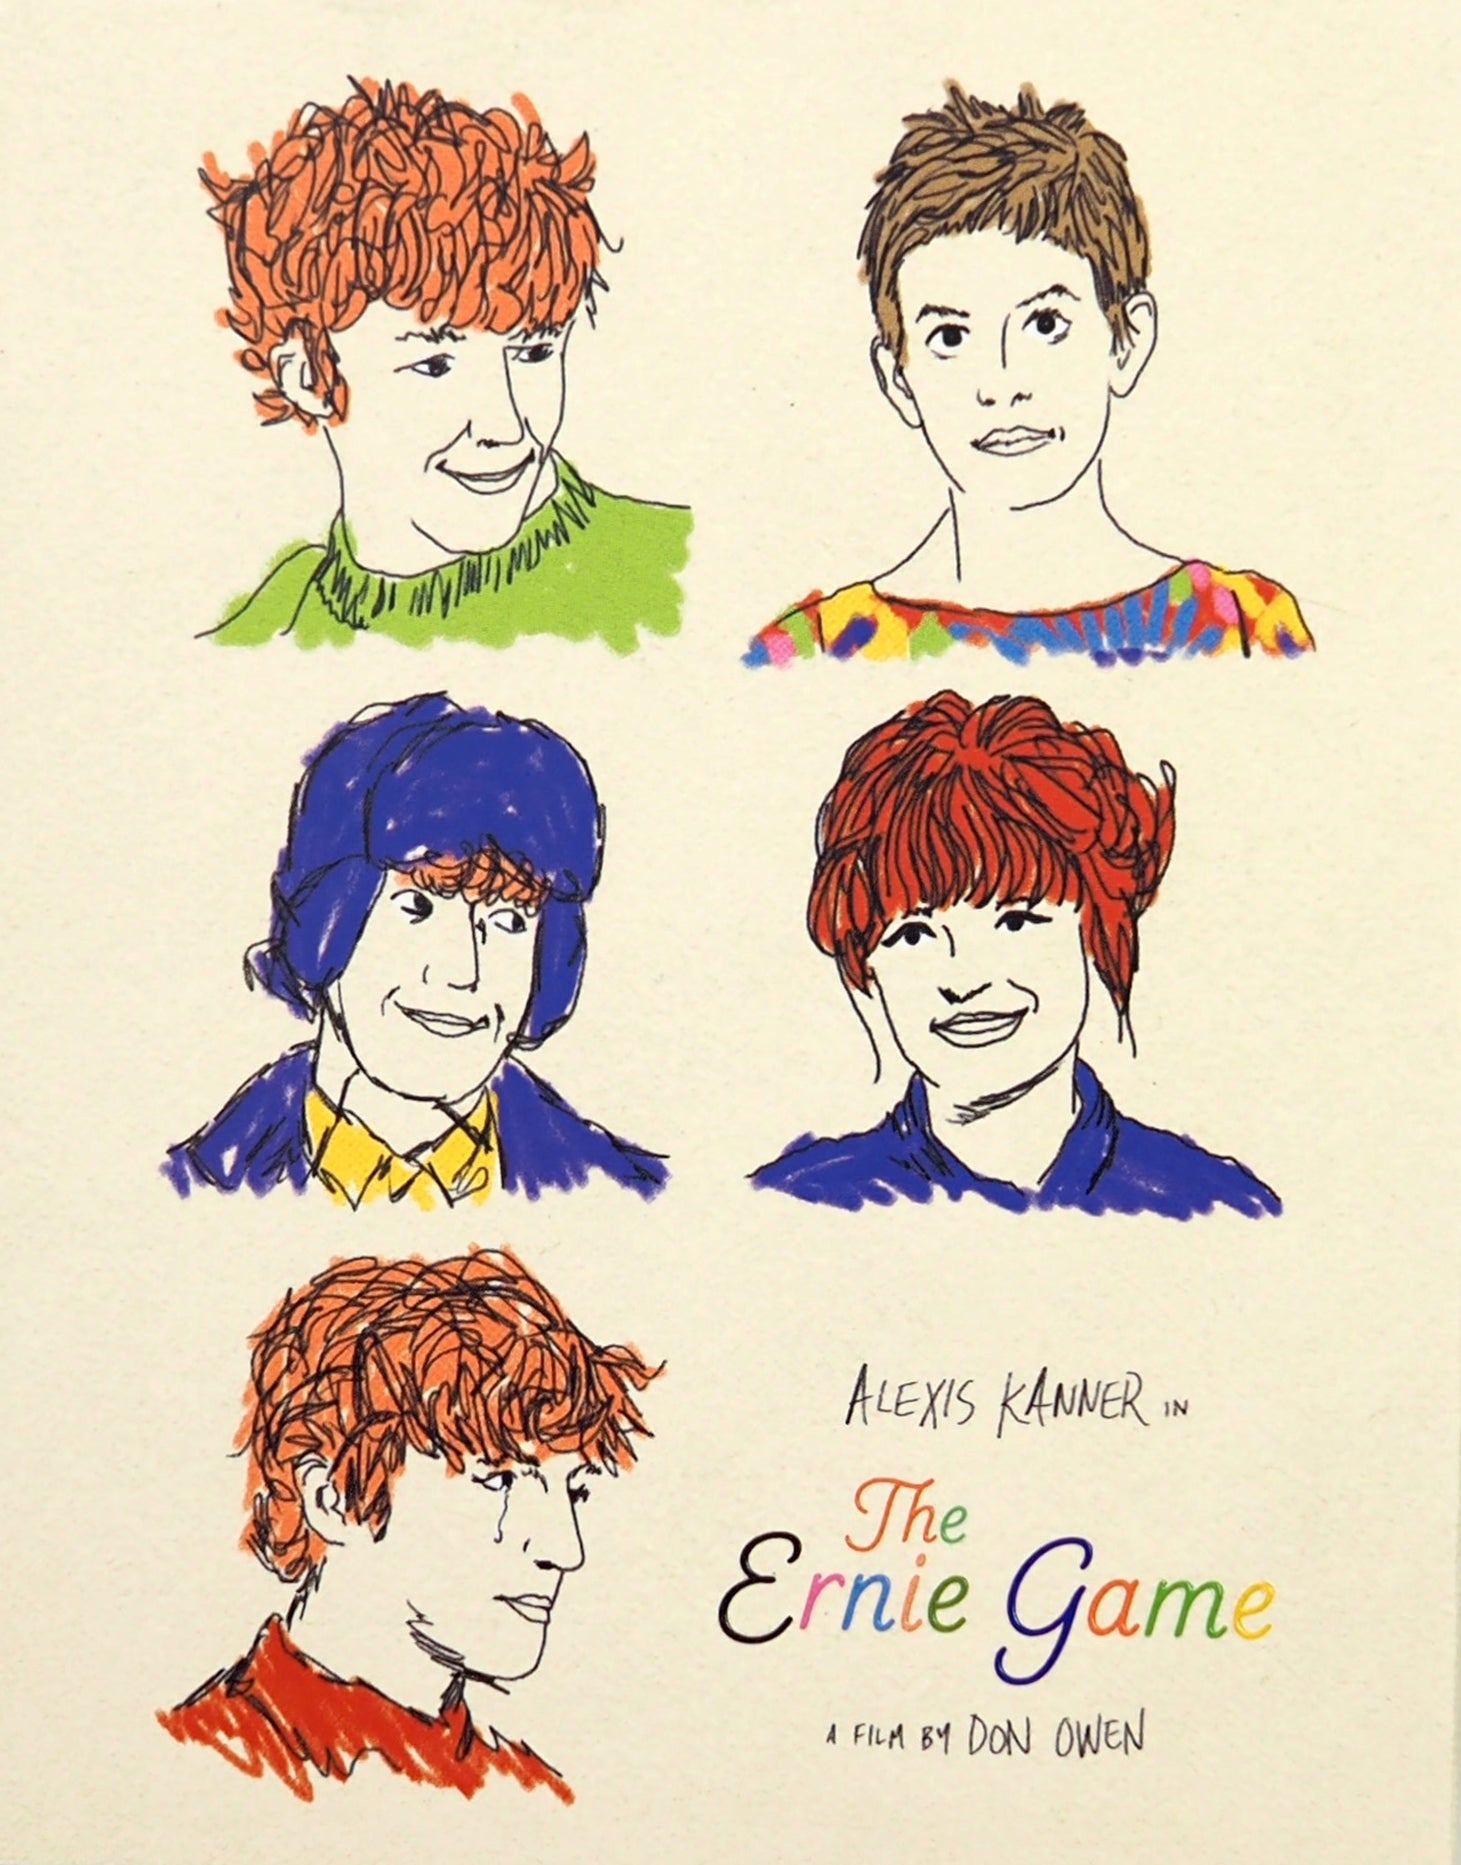 The Ernie Game (Limited Edition) Blu-Ray Blu-Ray